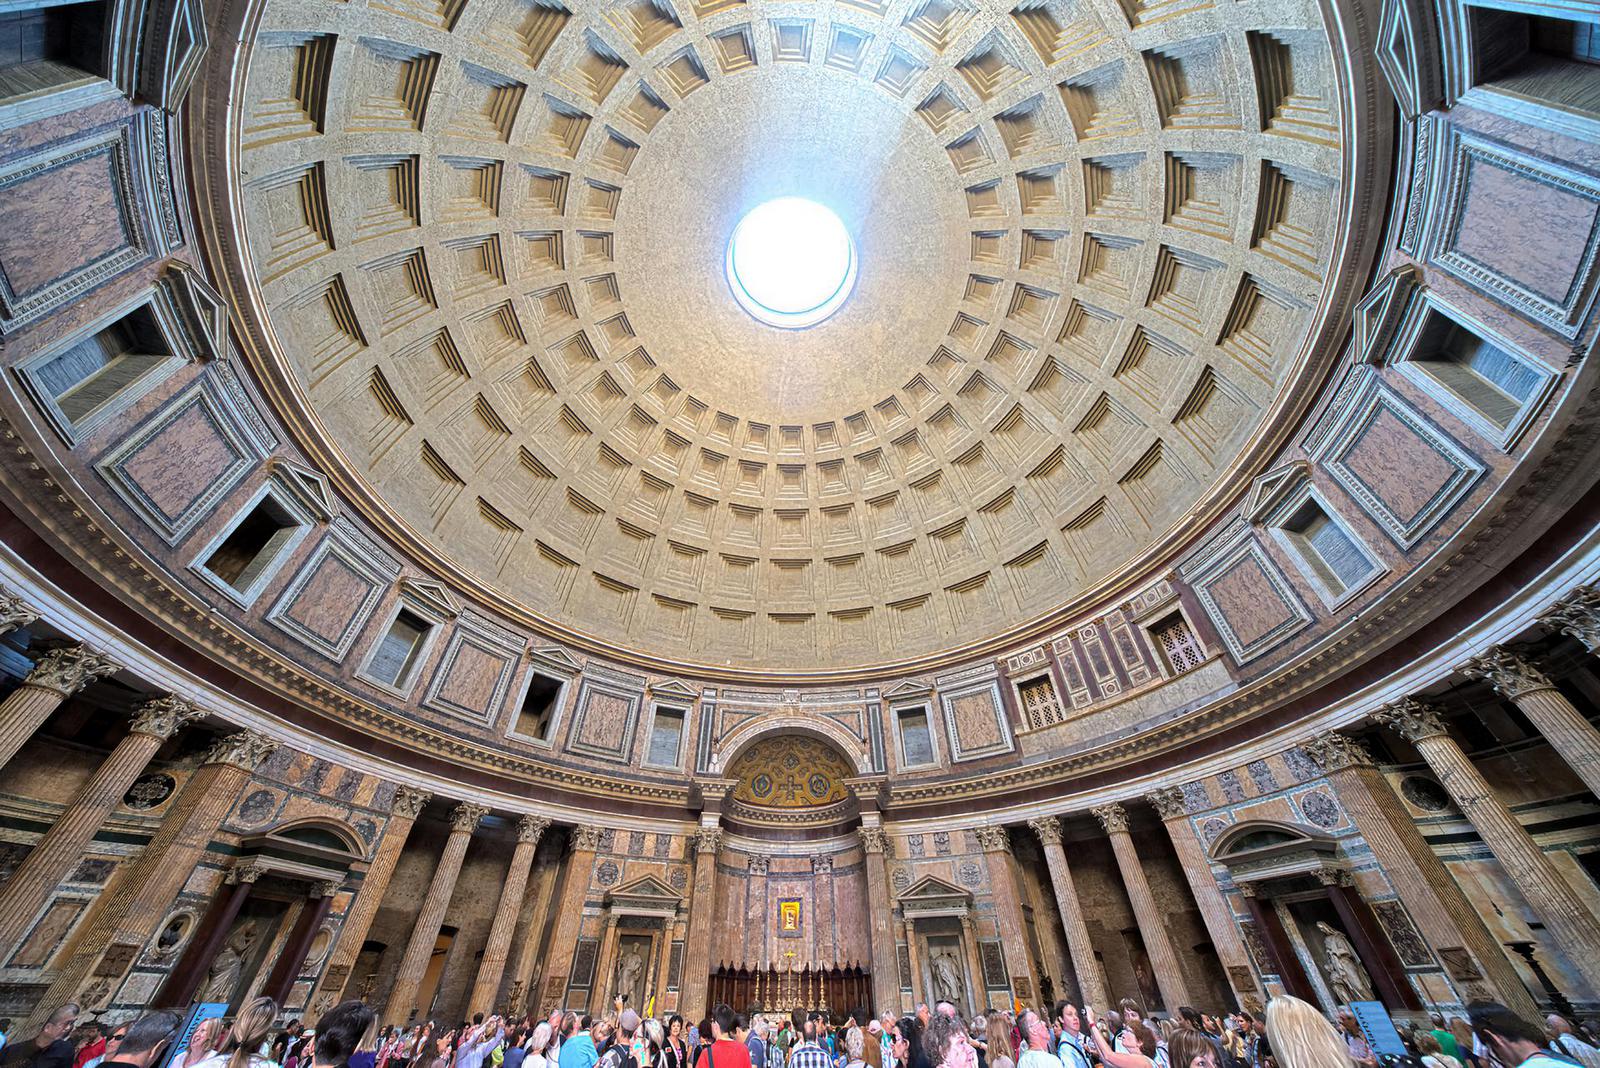 The Pantheon: A Temple to All - Monolithic Dome Institute